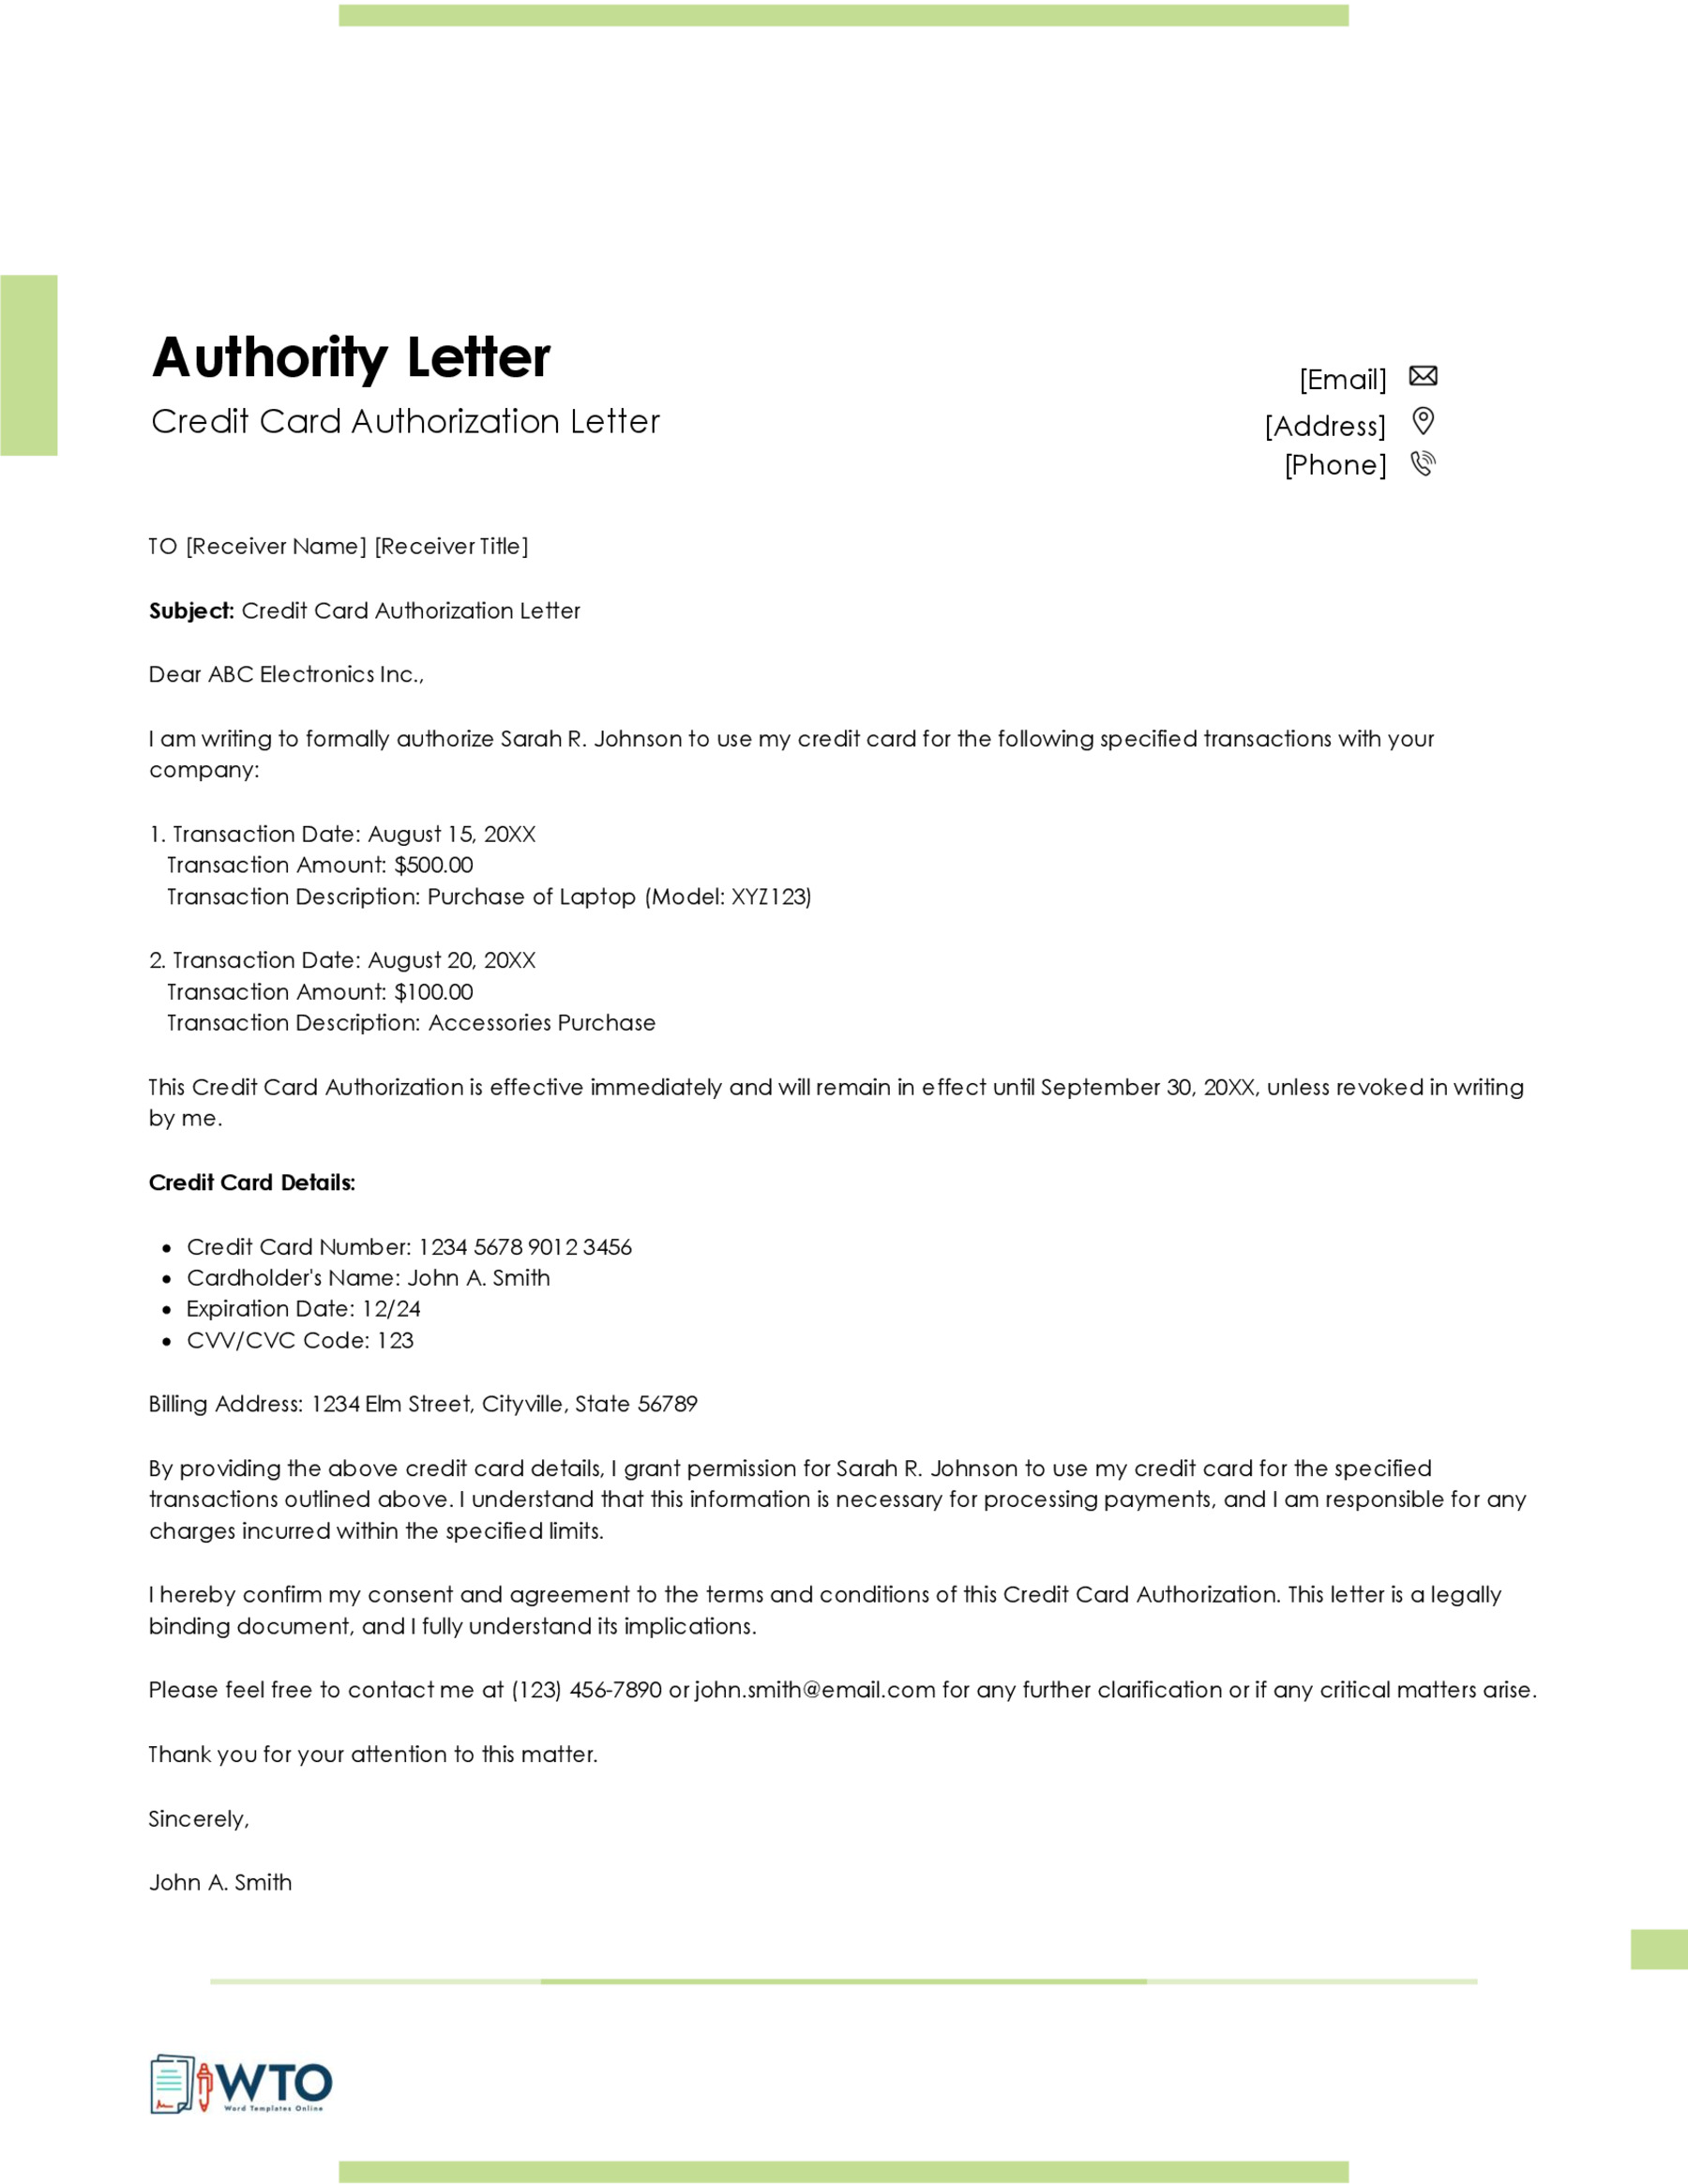 Credit Card Authorization Letter Sample in ms word free download